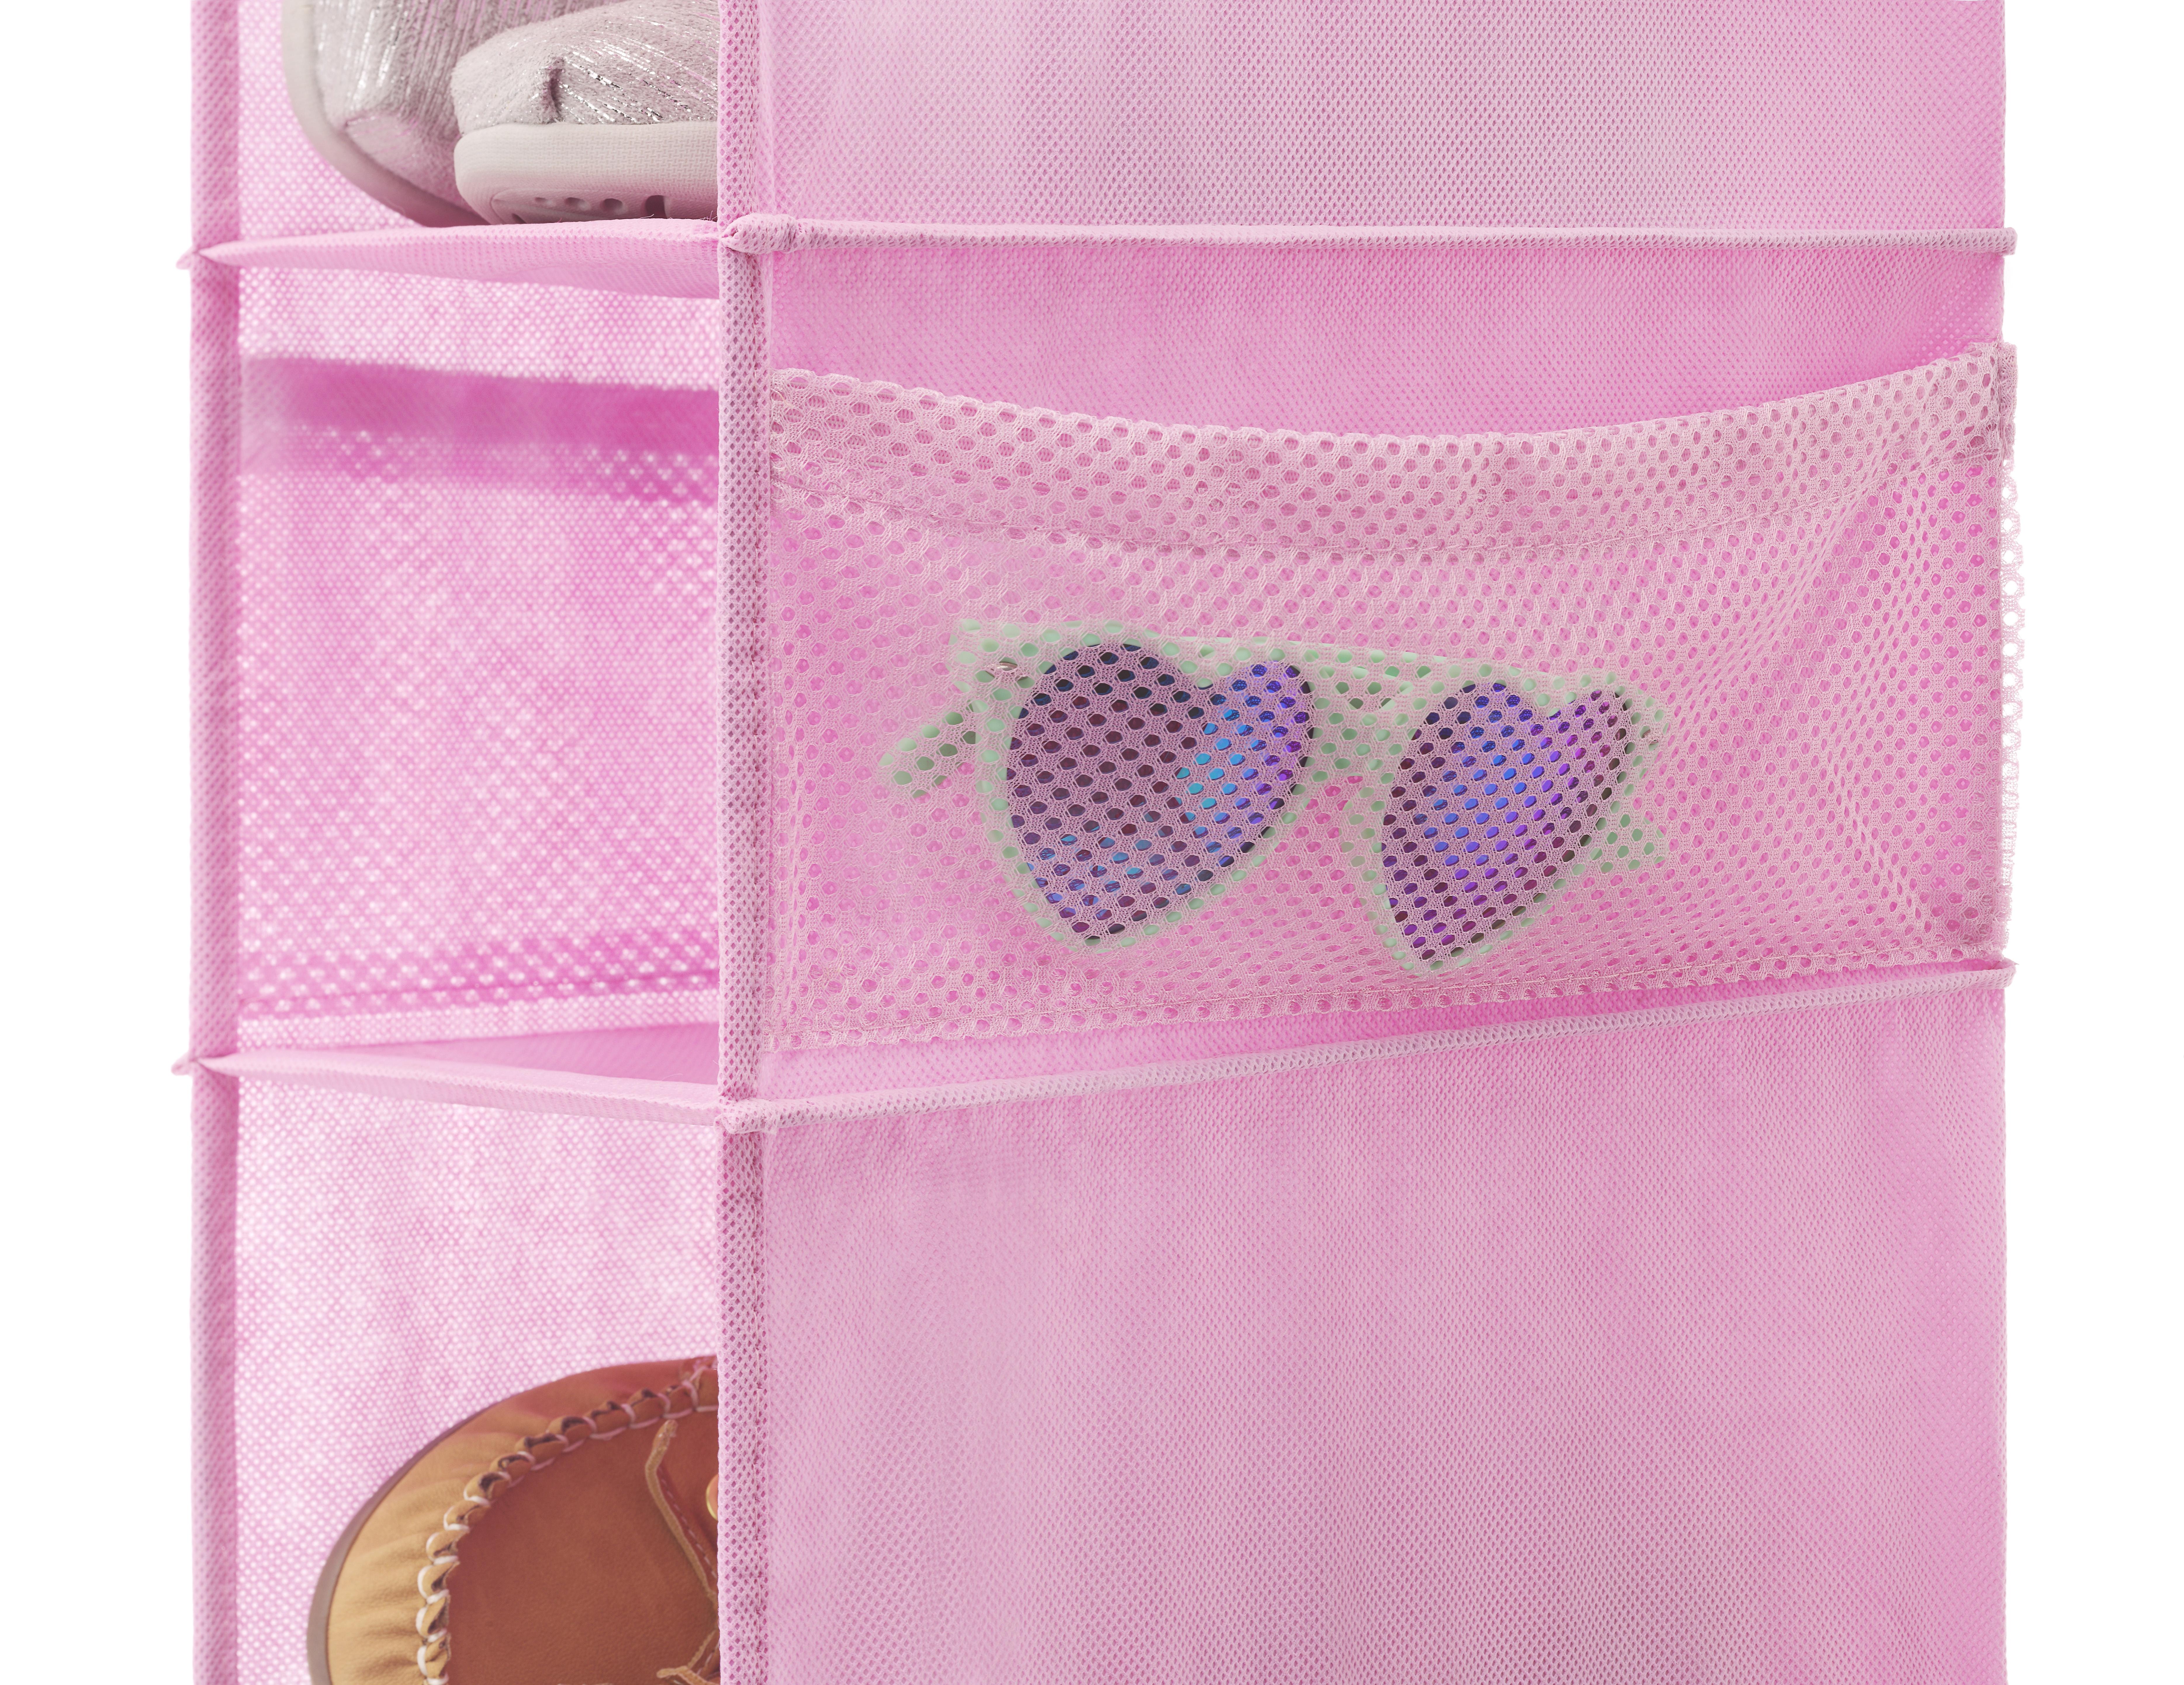 Whitmor 10-Shelf Polyester Mesh Hanging Shoe Shelves - Pink - Use for a Child, Teen, or Adult Room - image 3 of 3